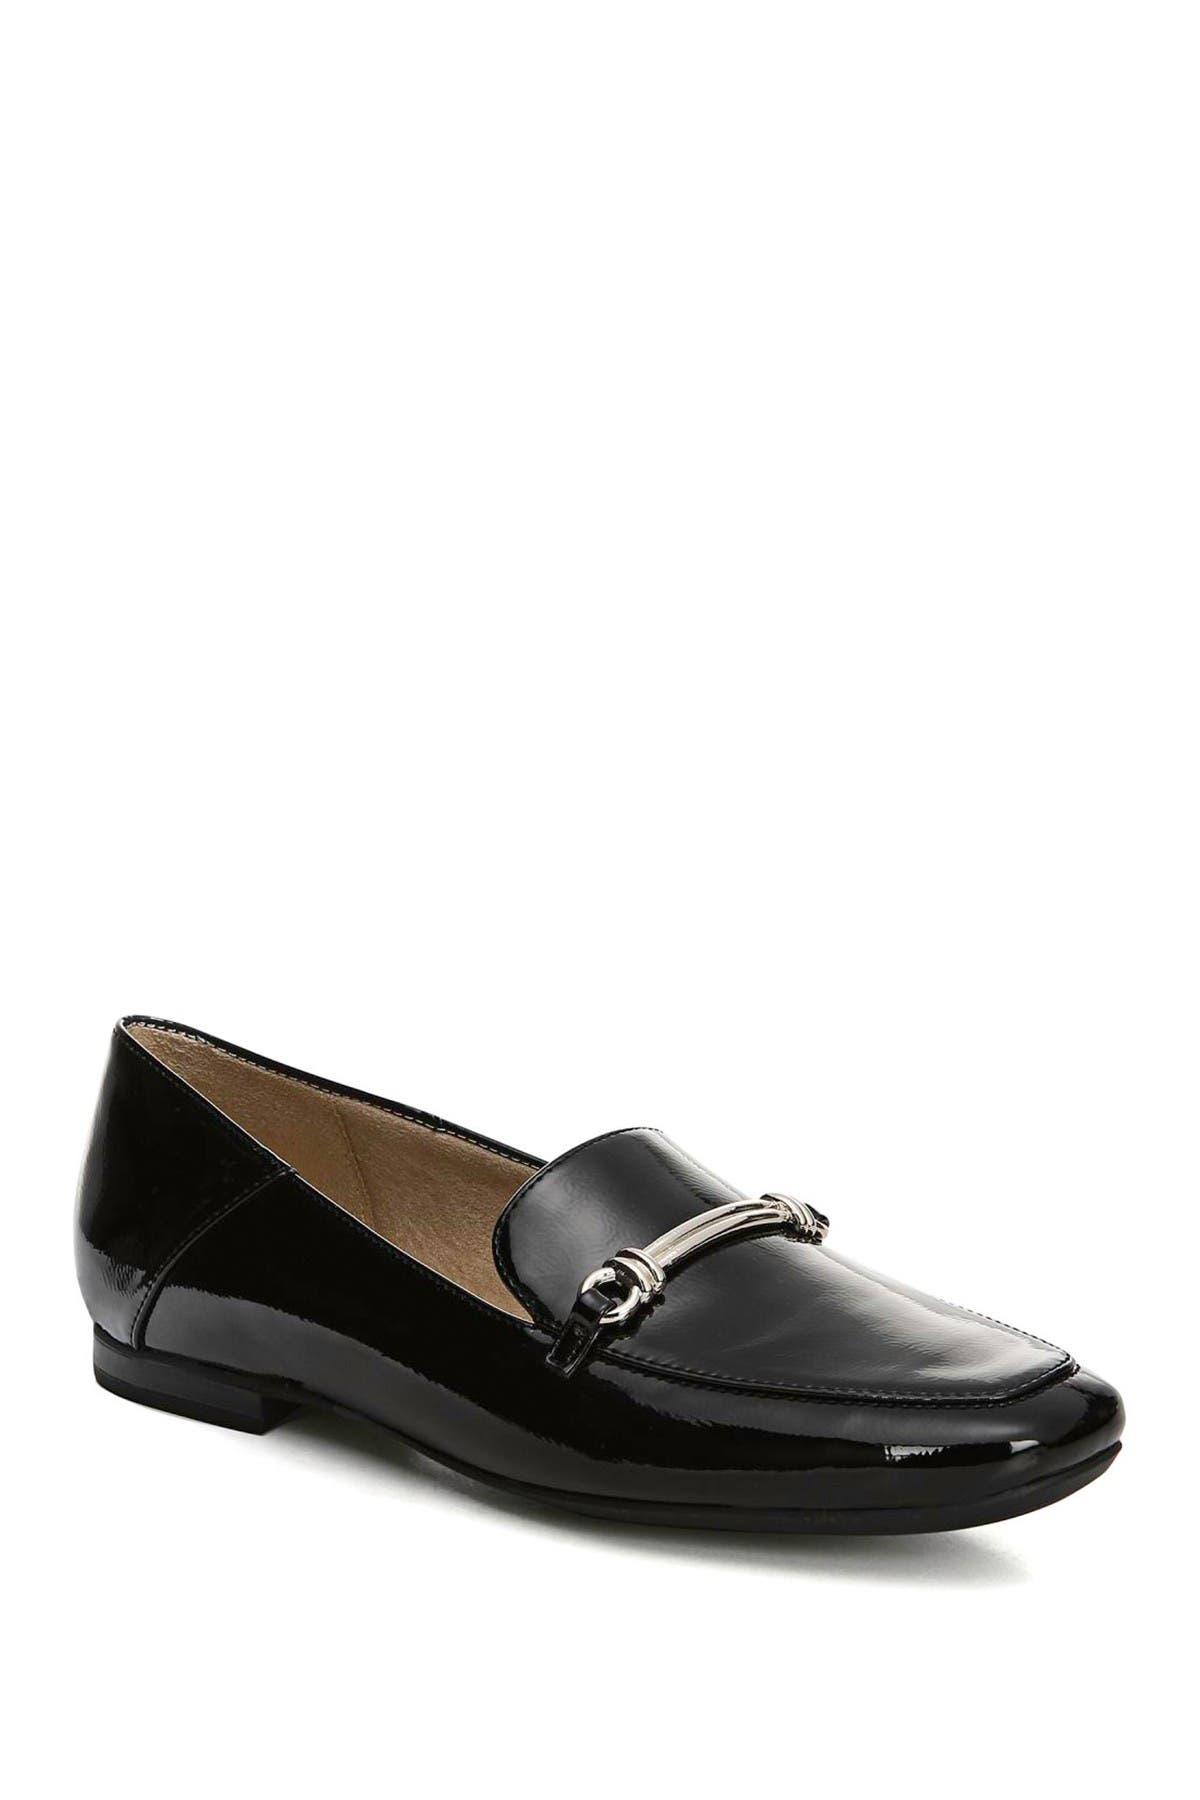 naturalizer patent loafers